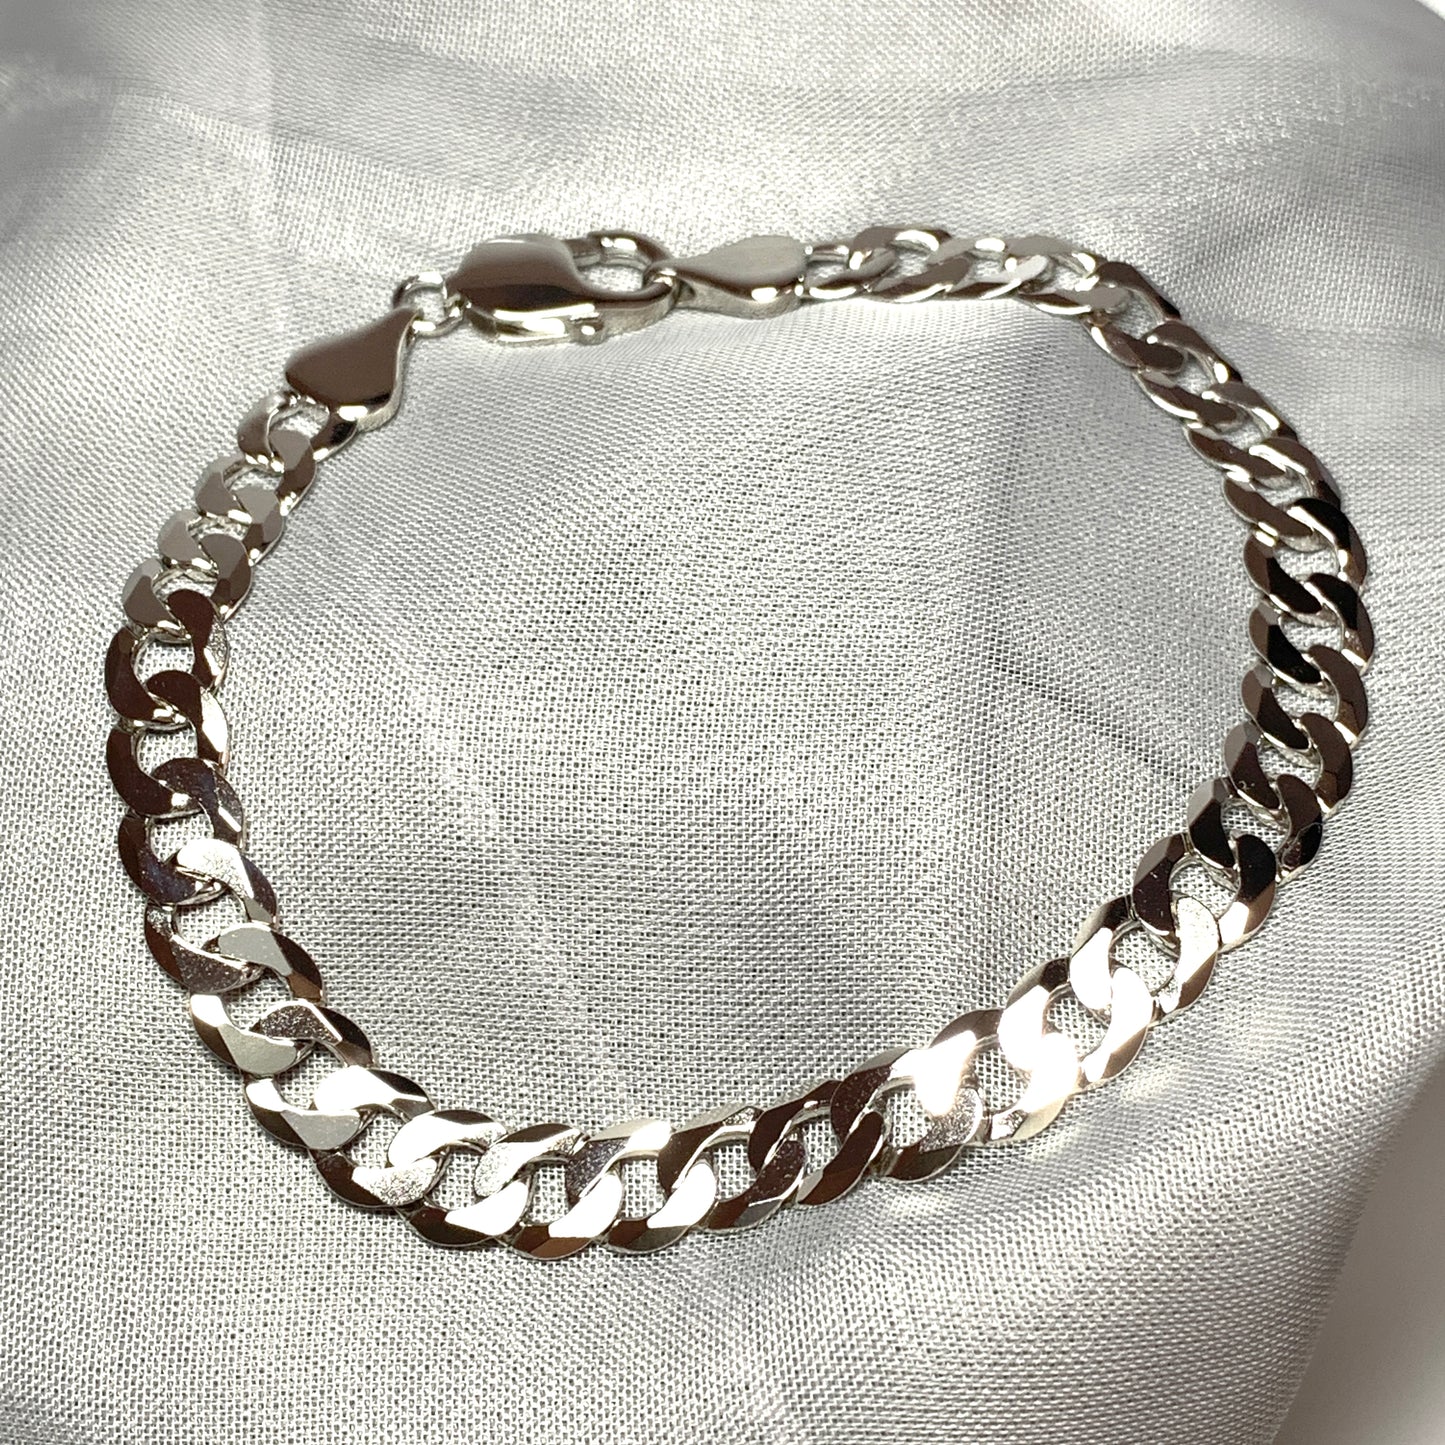 Men's bracelet solid curb sterling silver 9 inches